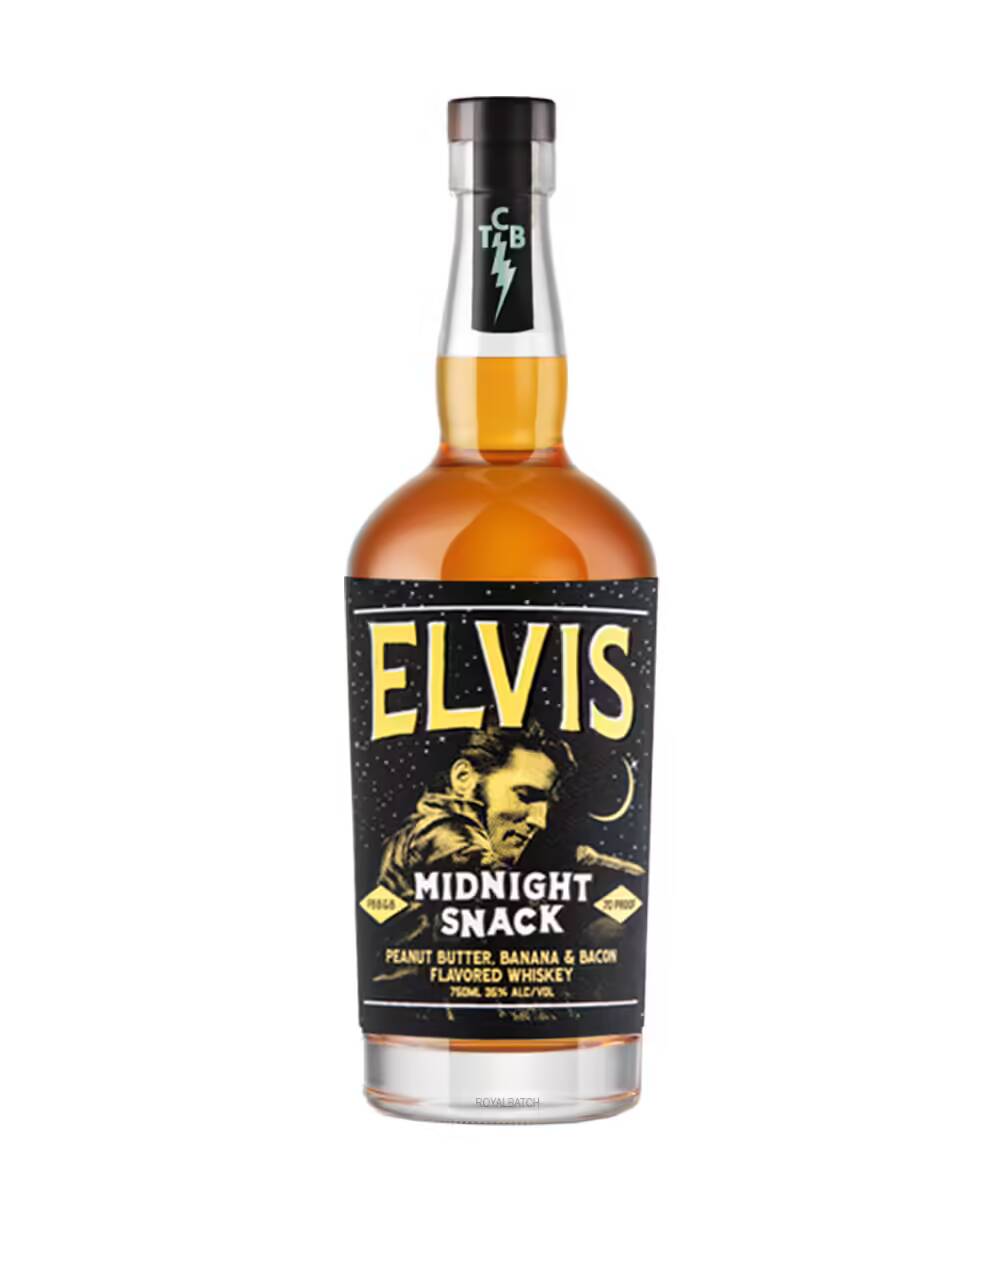 Elvis Midnight Snack Peanut Butter Banana and Bacon Flavored Whiskey